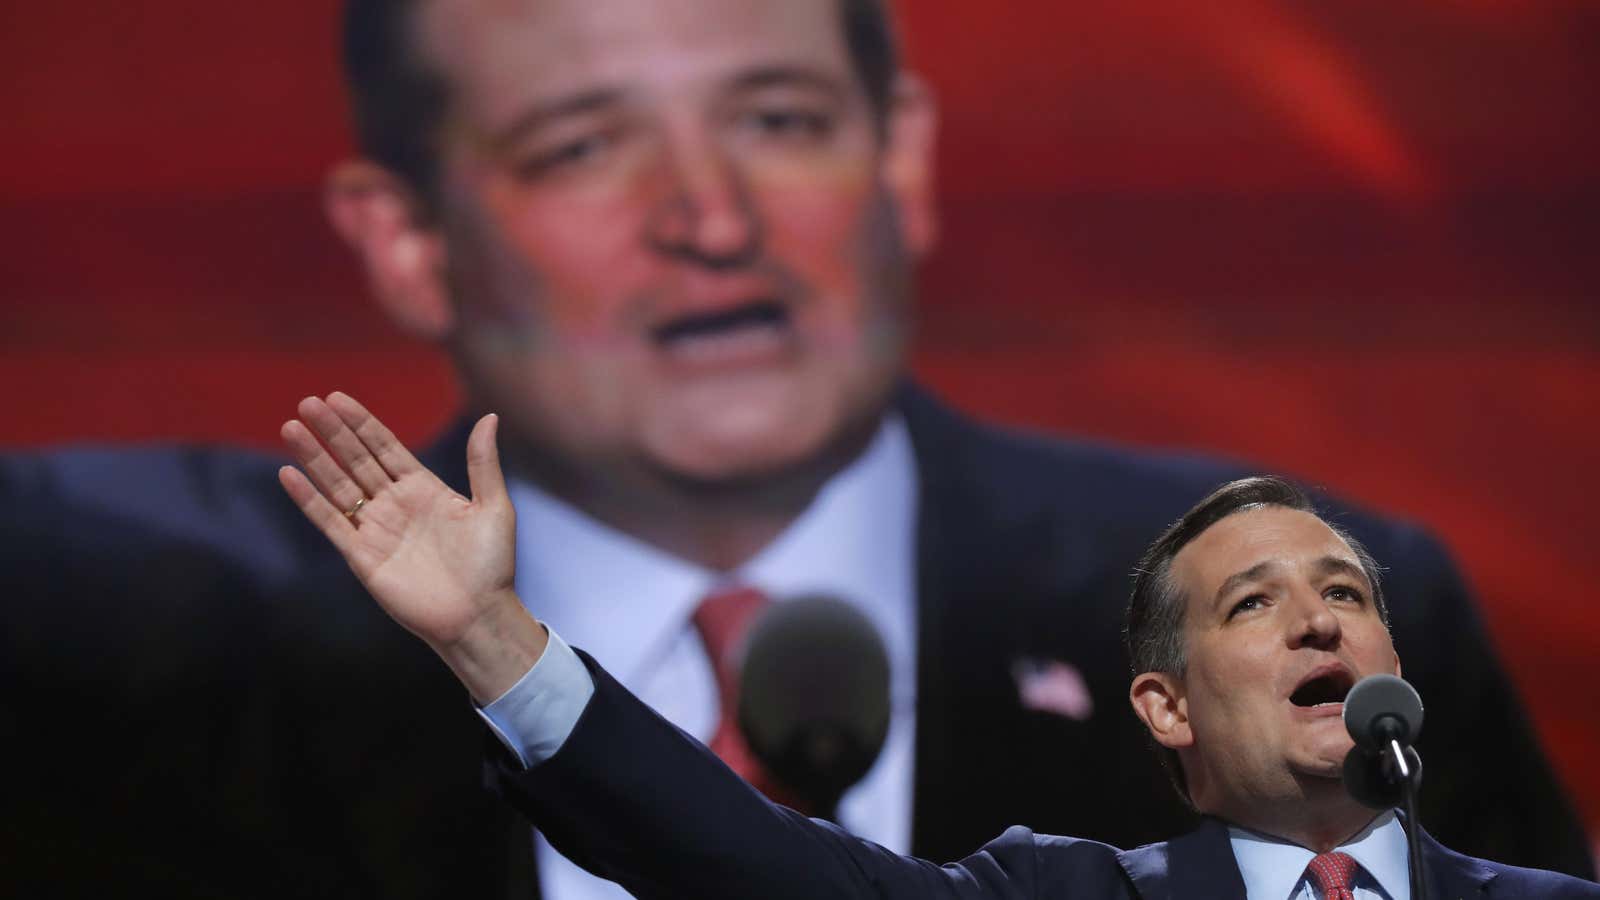 Ted Cruz started one way, but finished quite another.